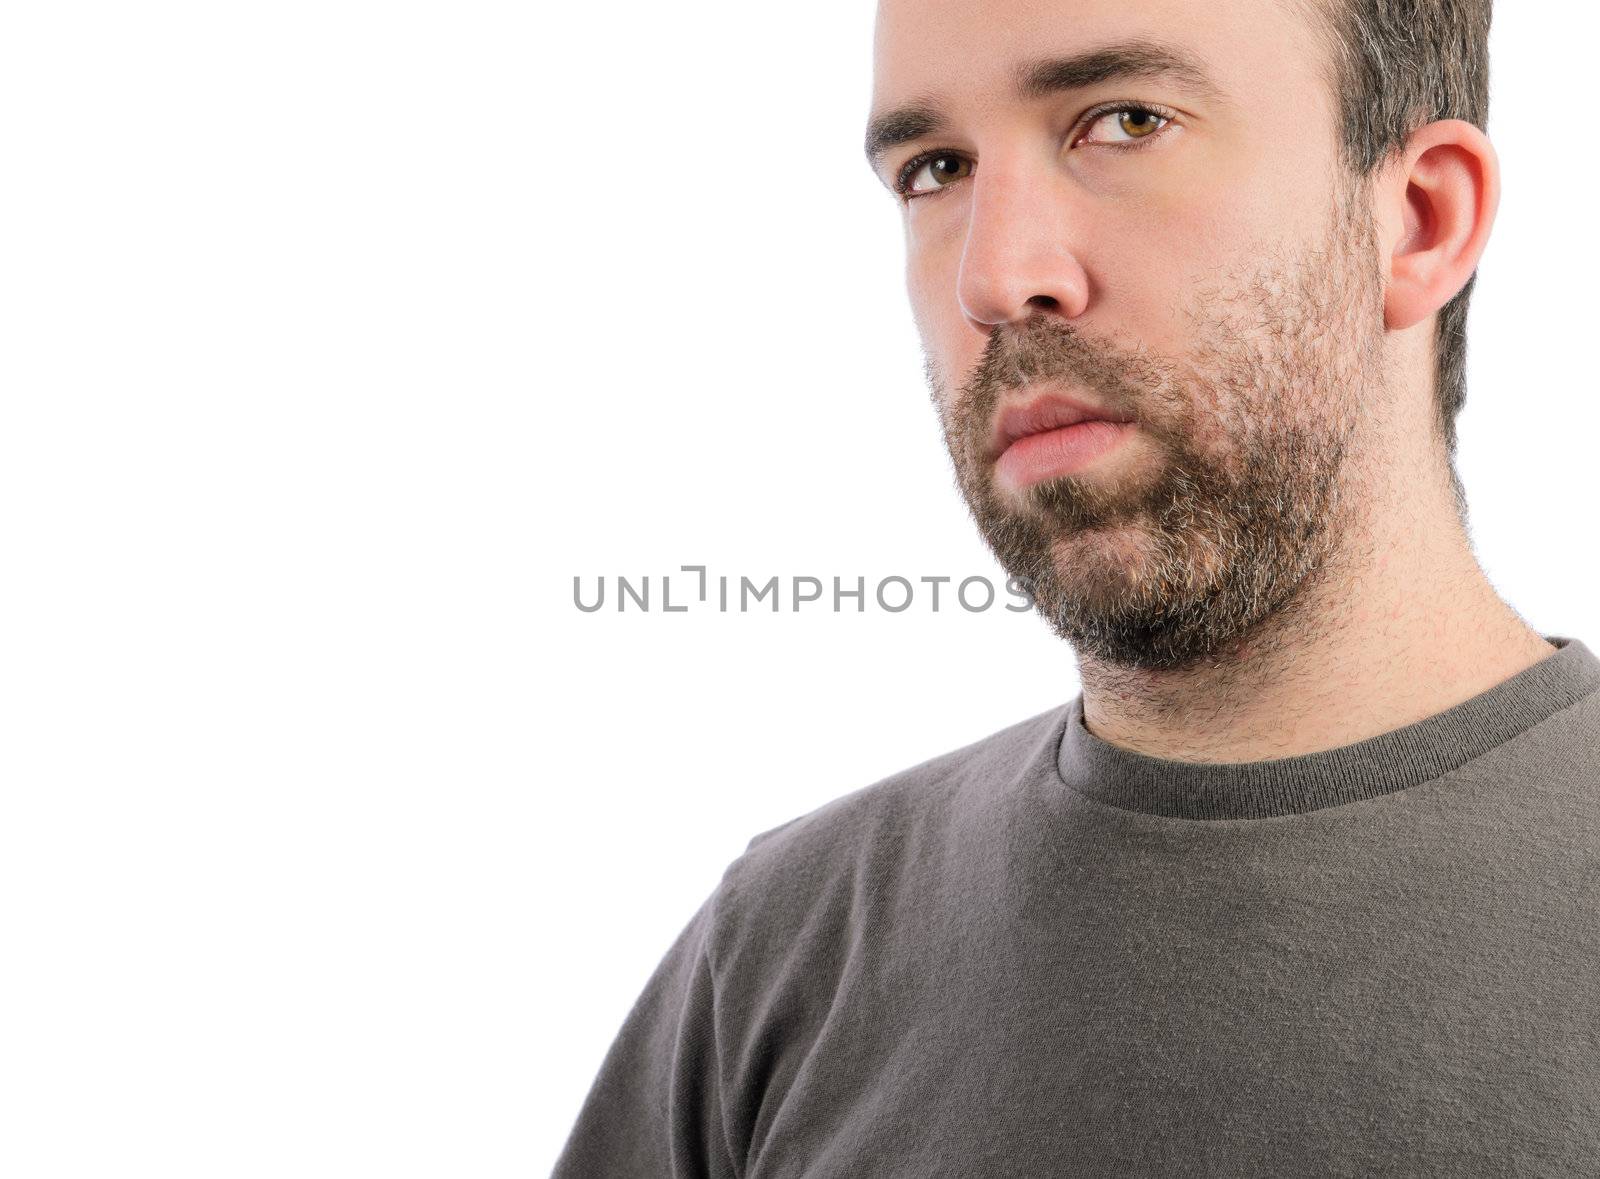 A serious man with a beard, isolated on a white background.